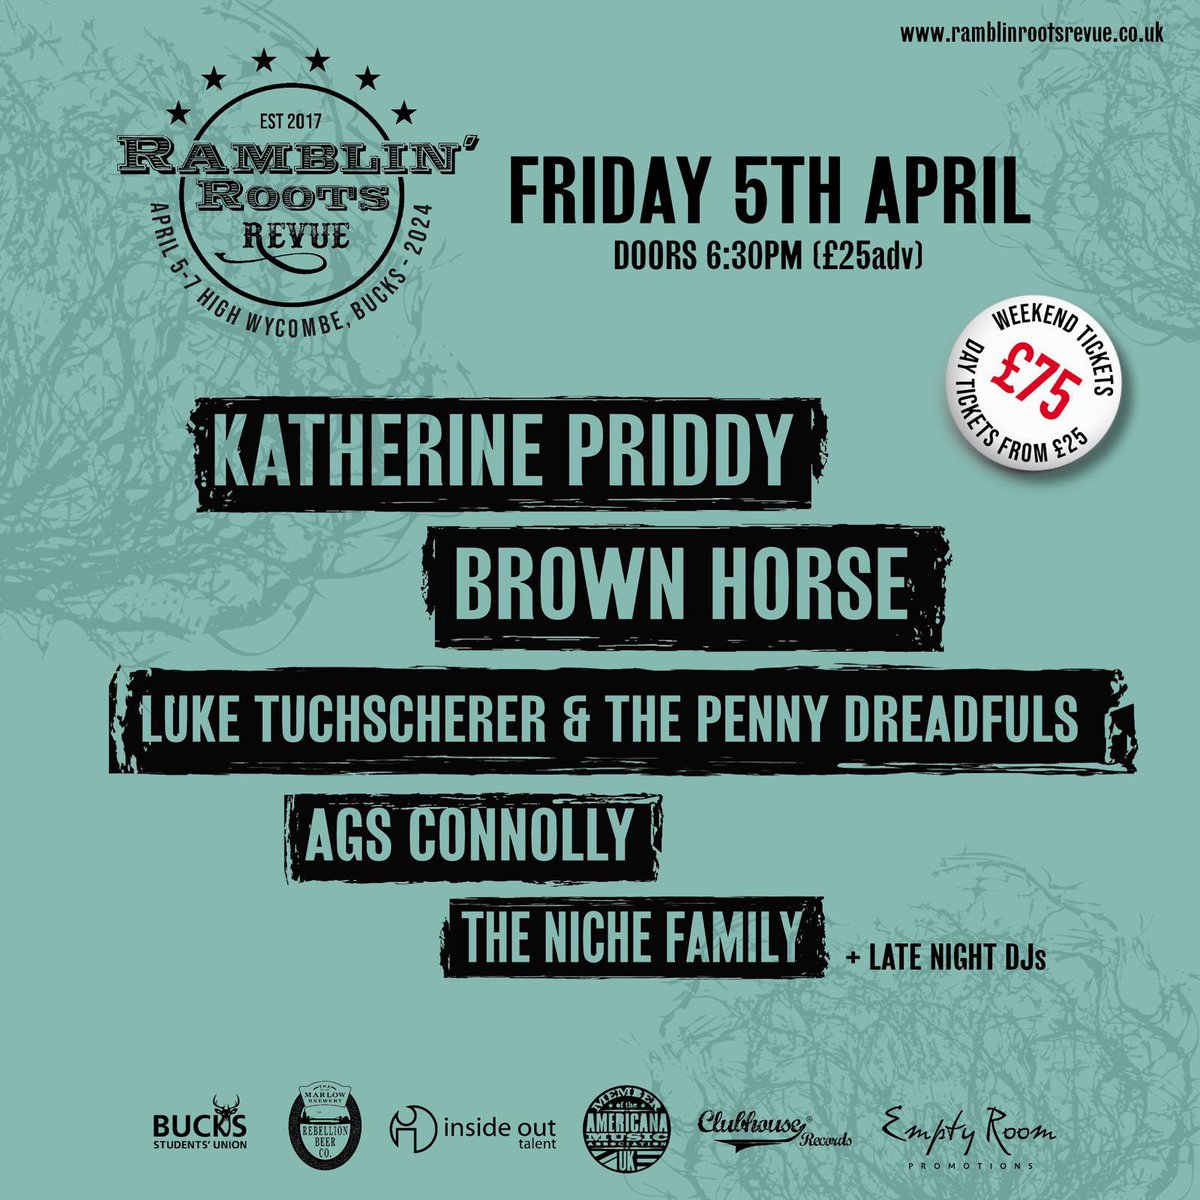 Catch @ConnollyAgs LIVE at @Ramblin_Roots Festival at Bucks Students’ Union in High Wycombe, Bucks Friday 5th April! #festivalnews #americana seetickets.com/event/the-ramb…